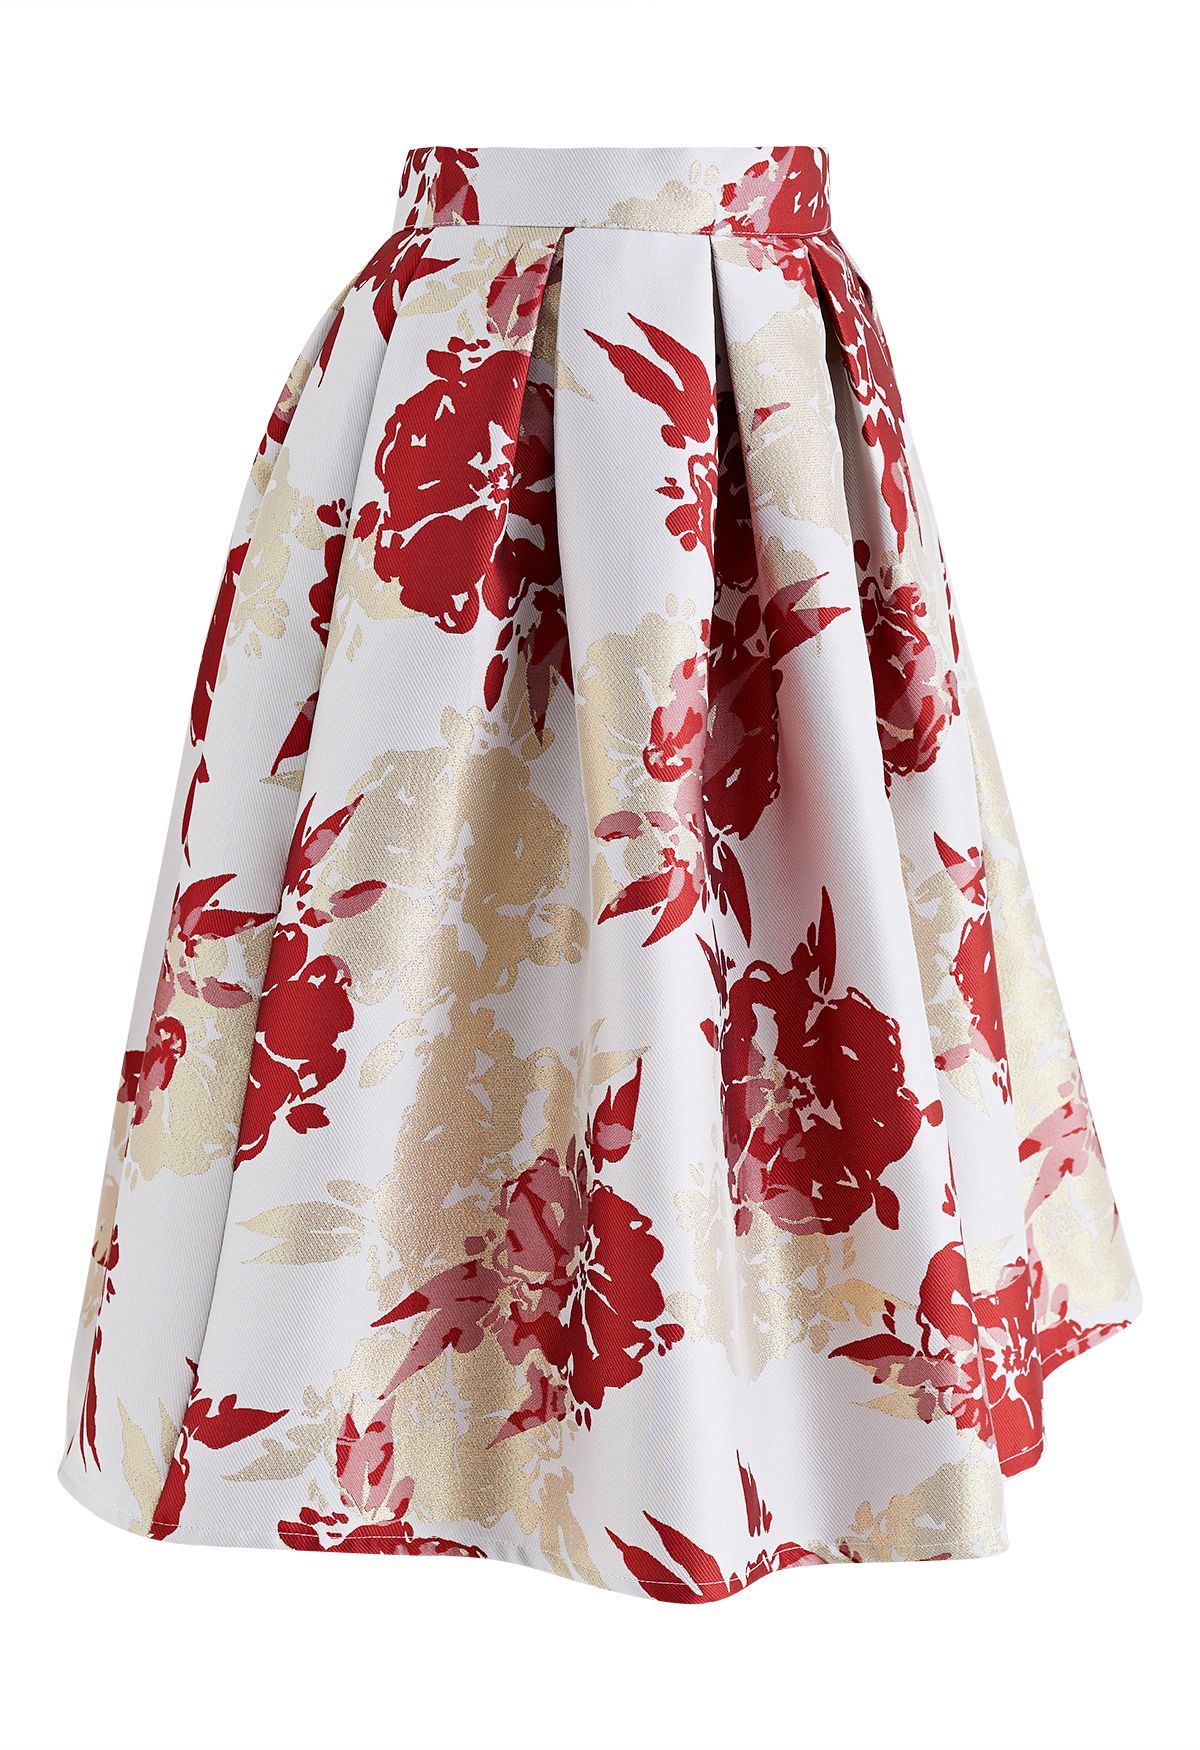 Blooming Floral Jacquard Pleated Midi Skirt in Red